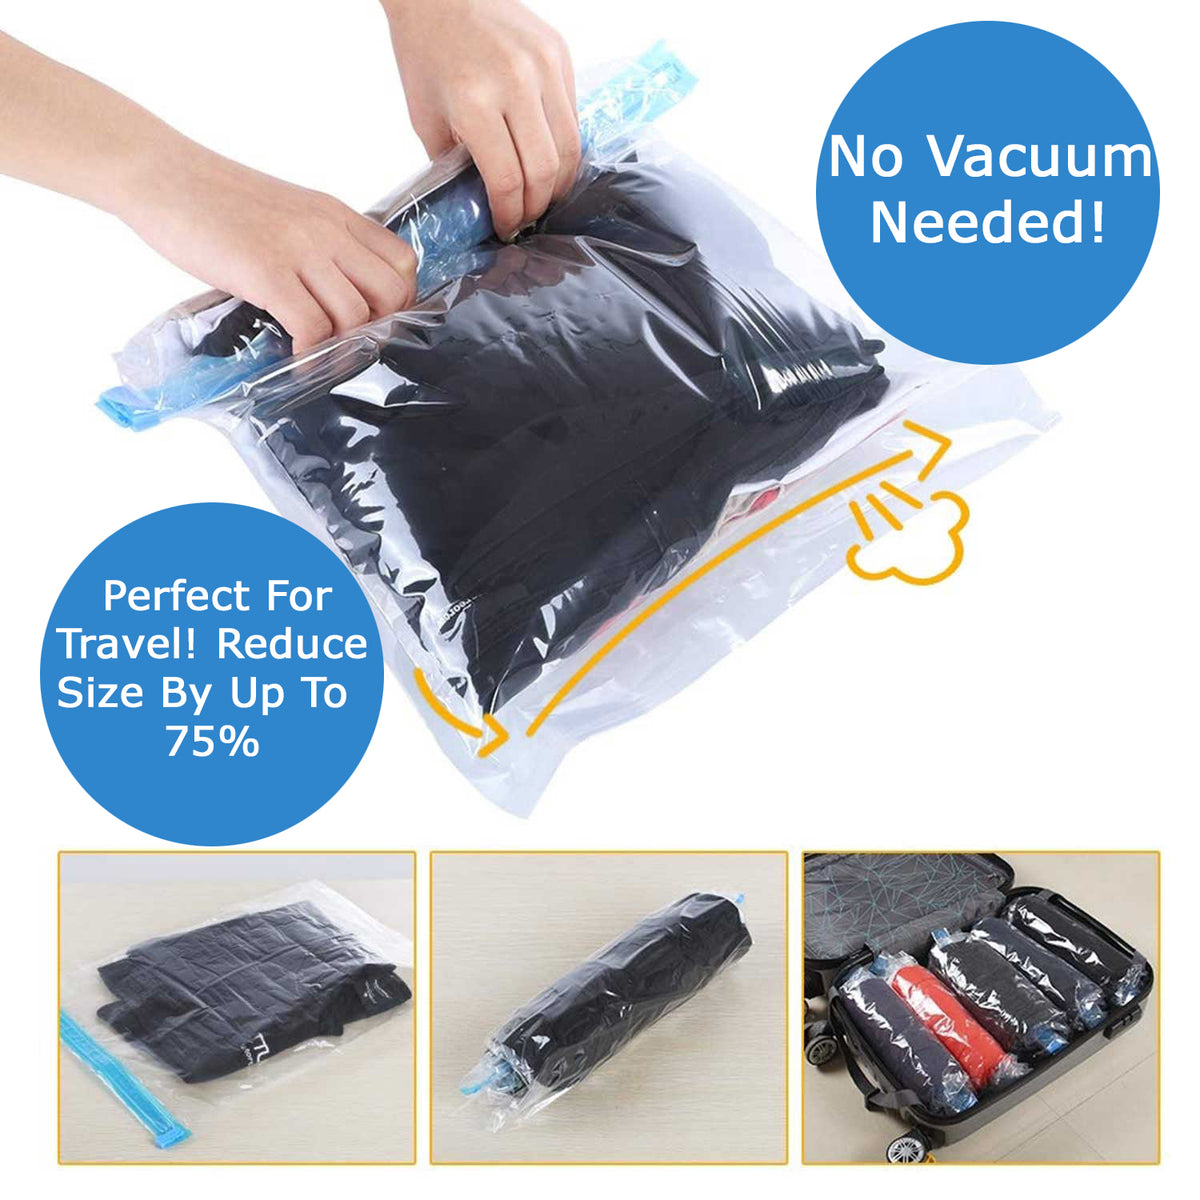 Bizroma Combo Vacuum Storage Bags for Clothes, Travel, Moving (6